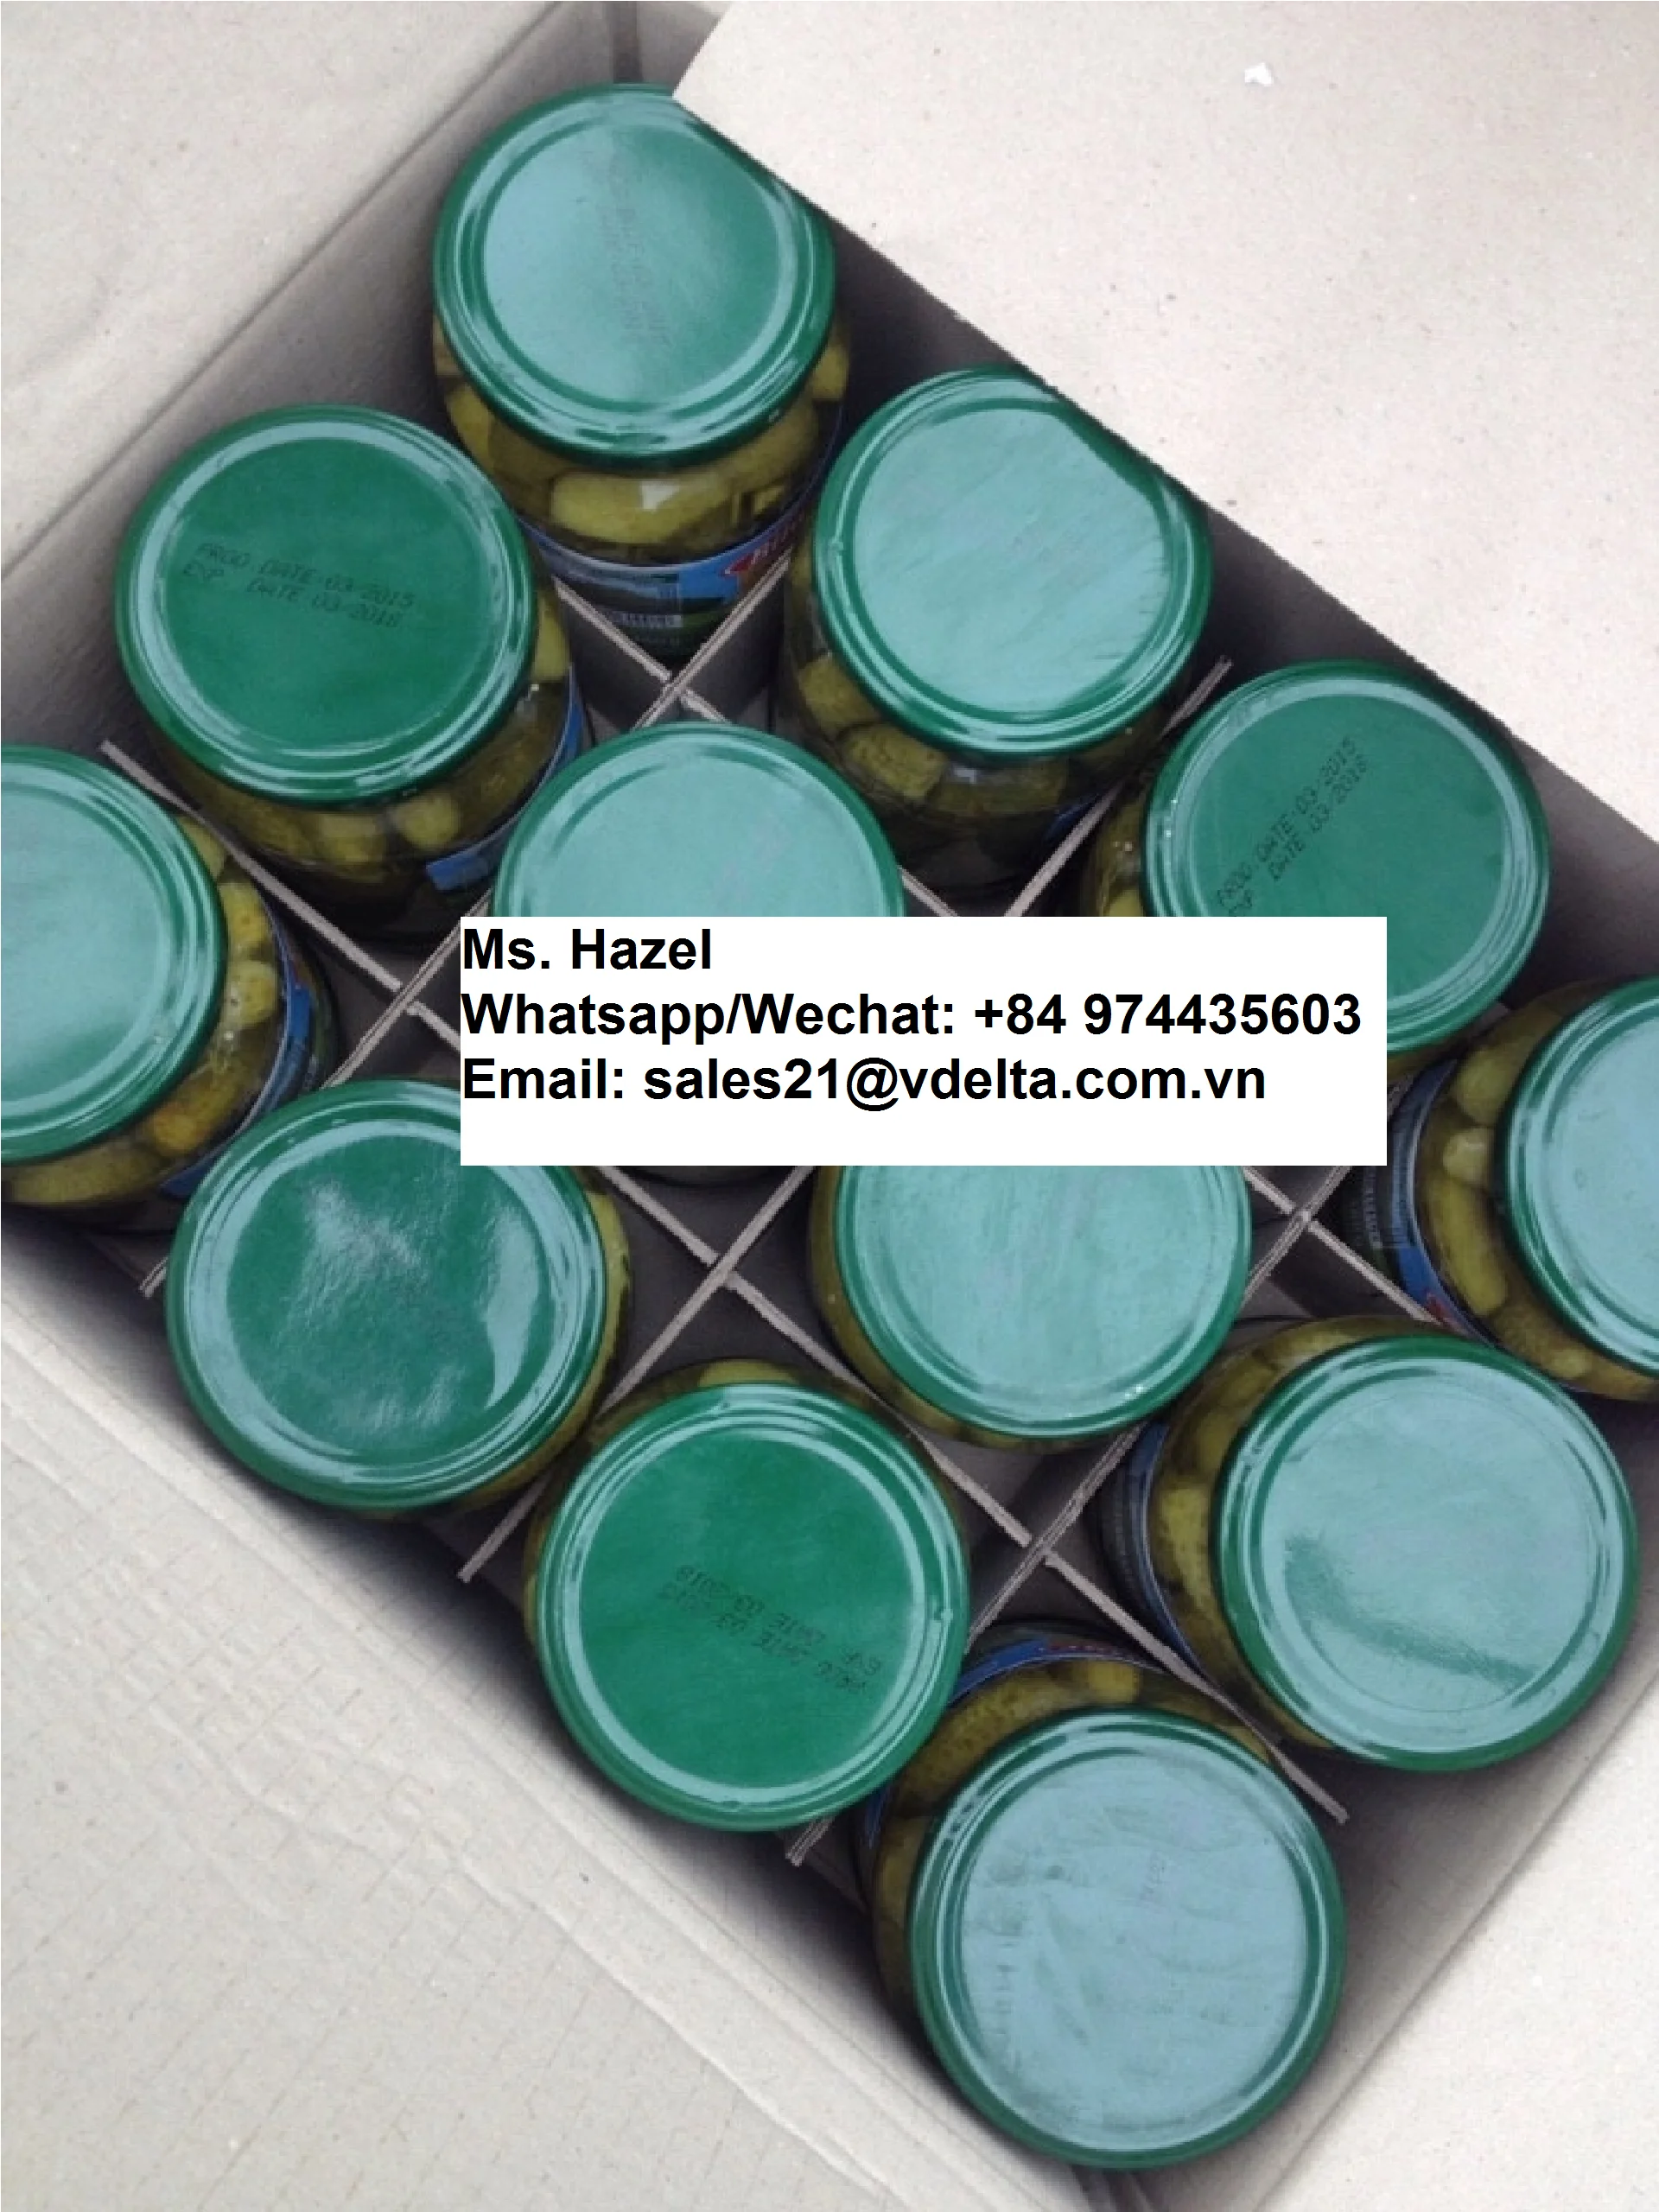 Salted Pickled Whole Cucumbers For Food Export/Cheap Price Canned Baby Cucumber/Ms. Hazel (+84) 974435603